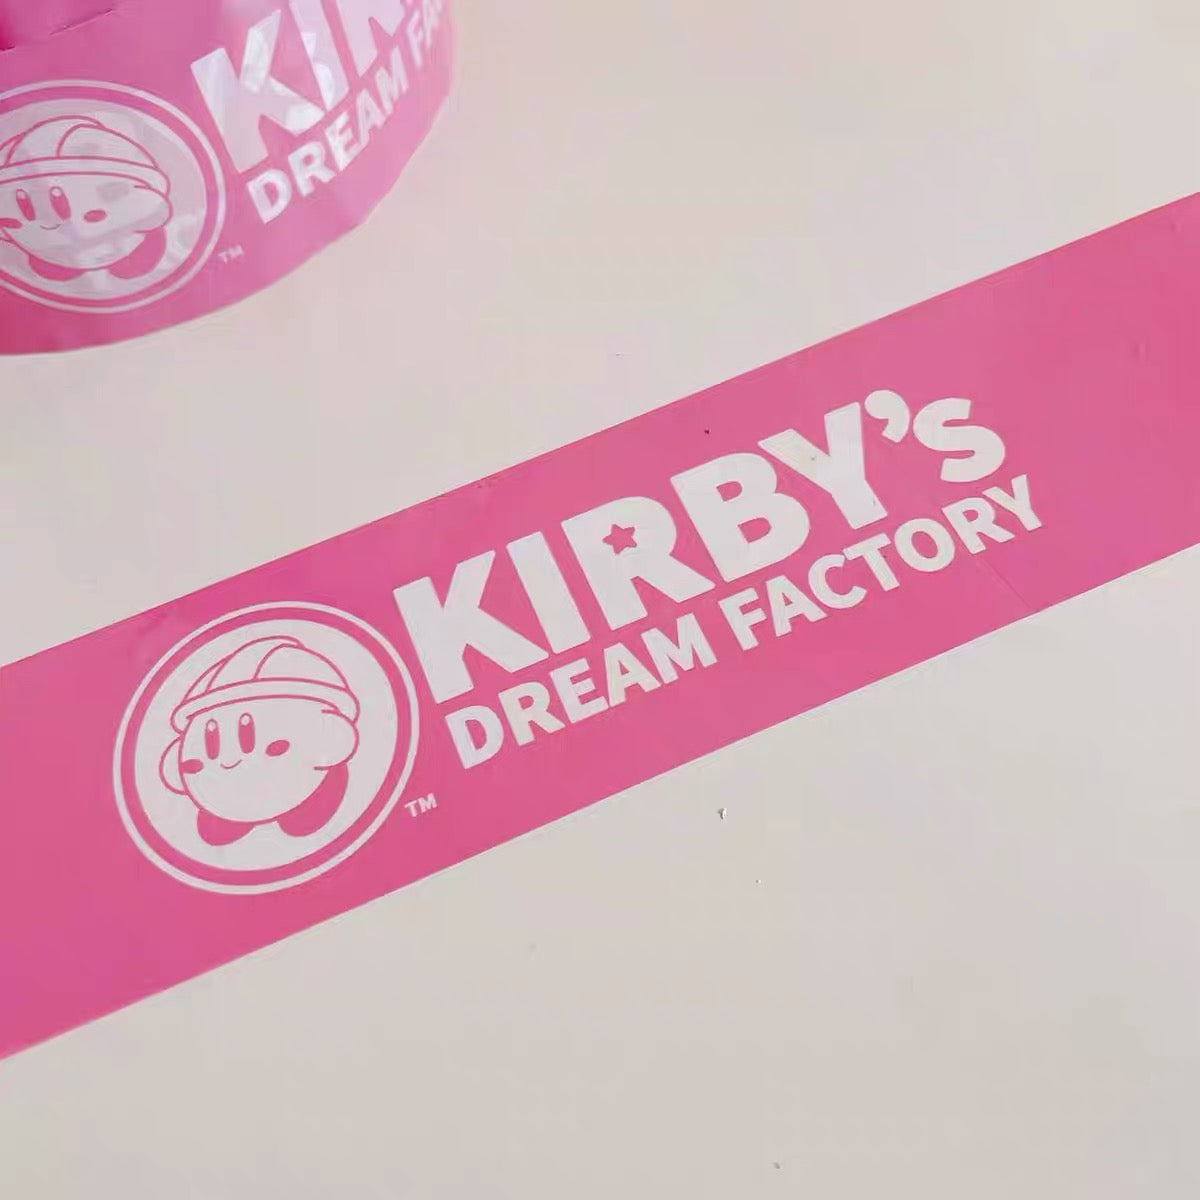 Kirby’s Dream Factory Tape